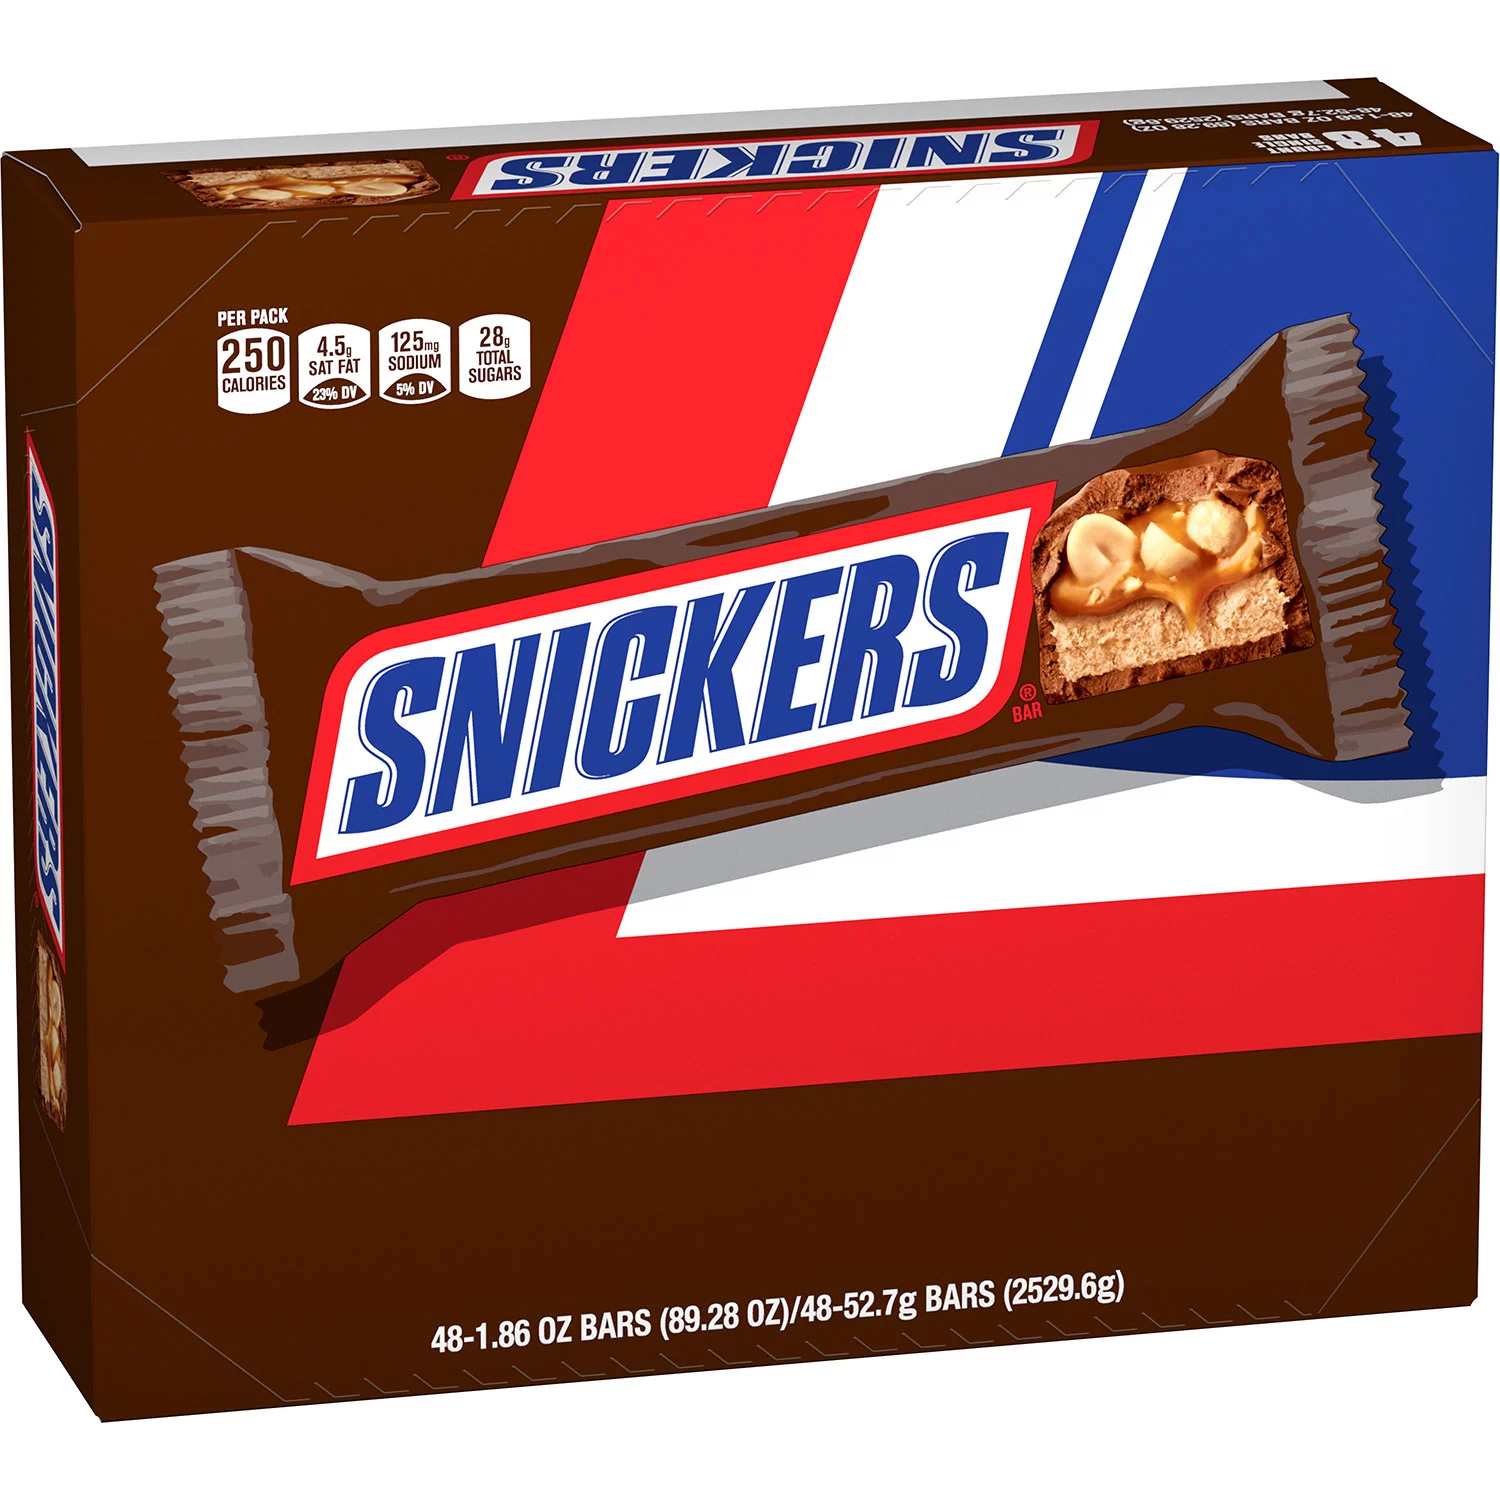 SNICKERS Minis Size Chocolate Bar Variety Mix Candy Bag, 16 oz, Chocolate